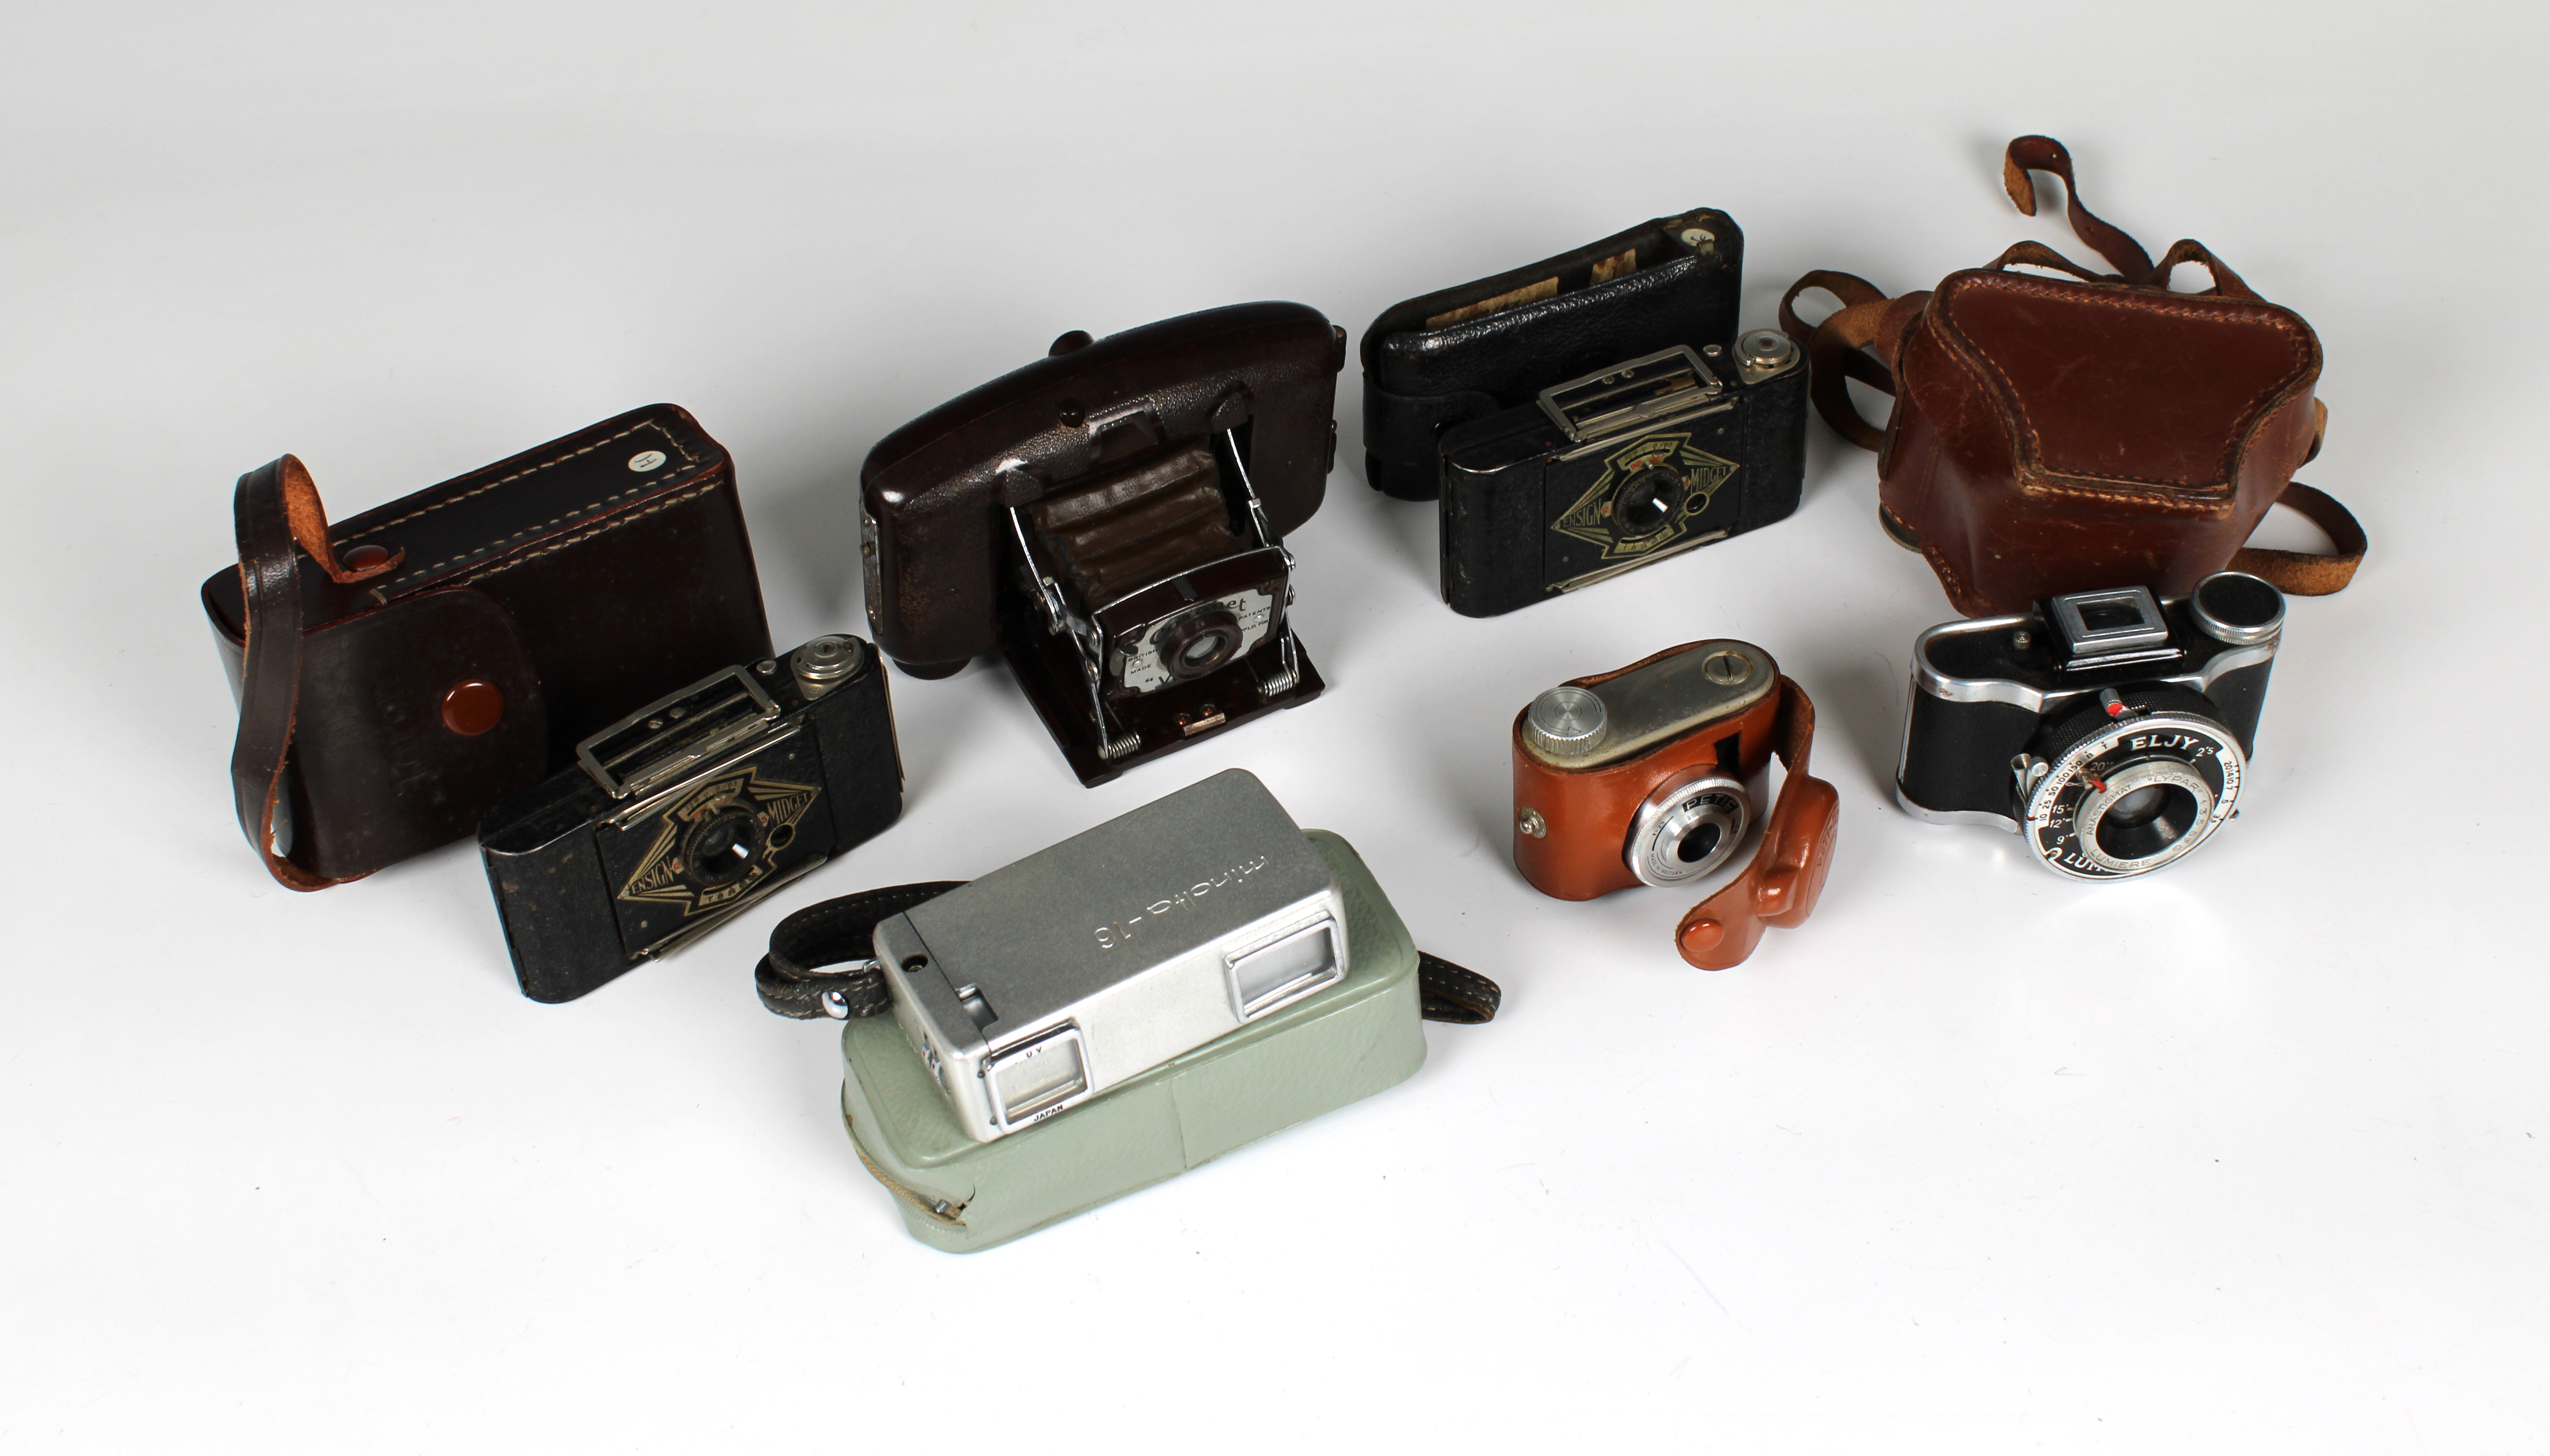 A collection of vintage miniature cameras